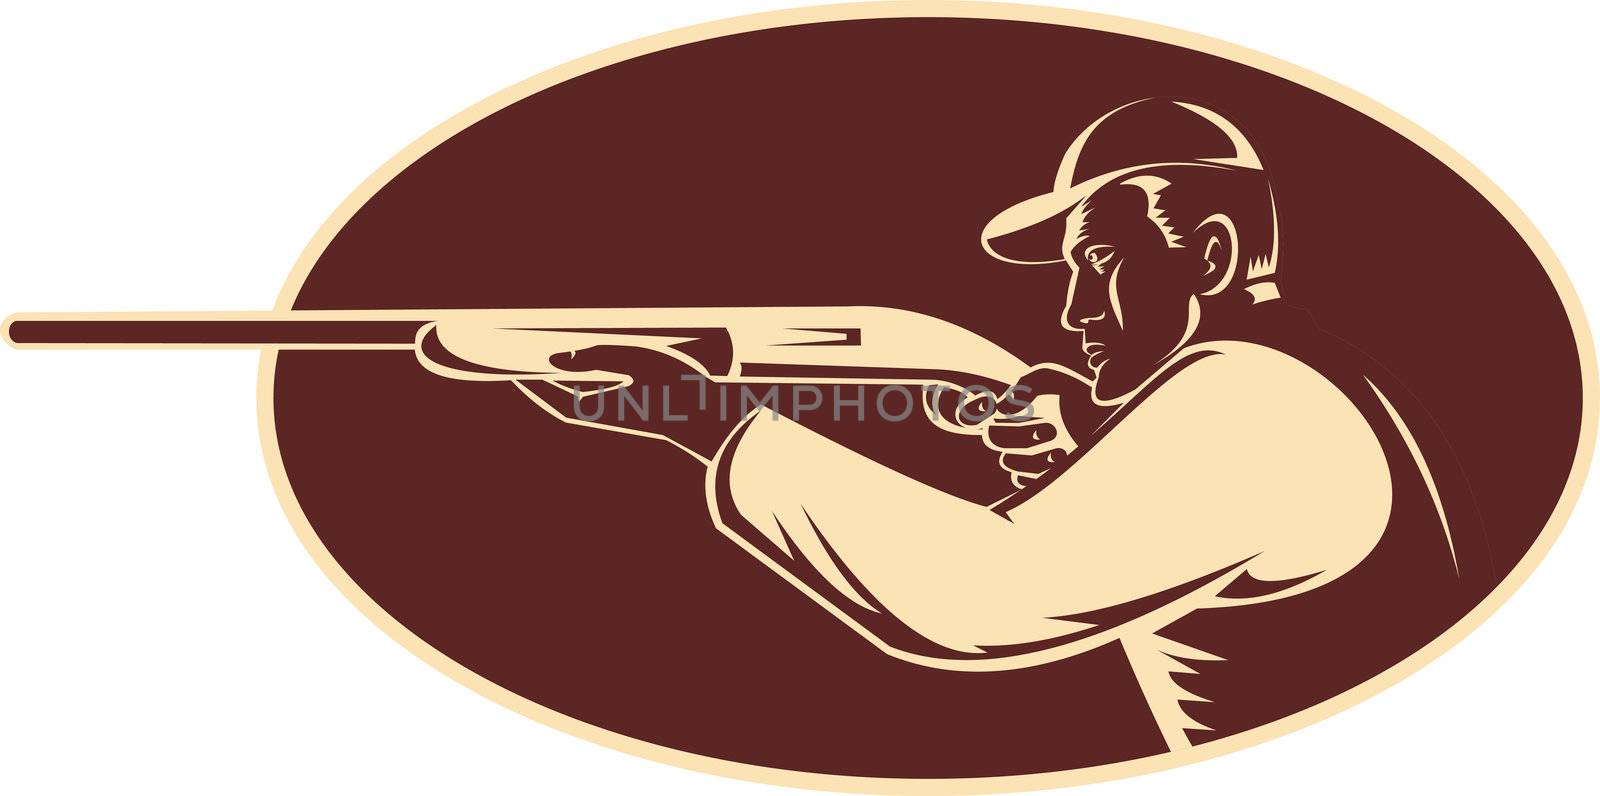 illustration of a hunter shooting aiming shotgun rifle viewed from side woodcut set inside oval 